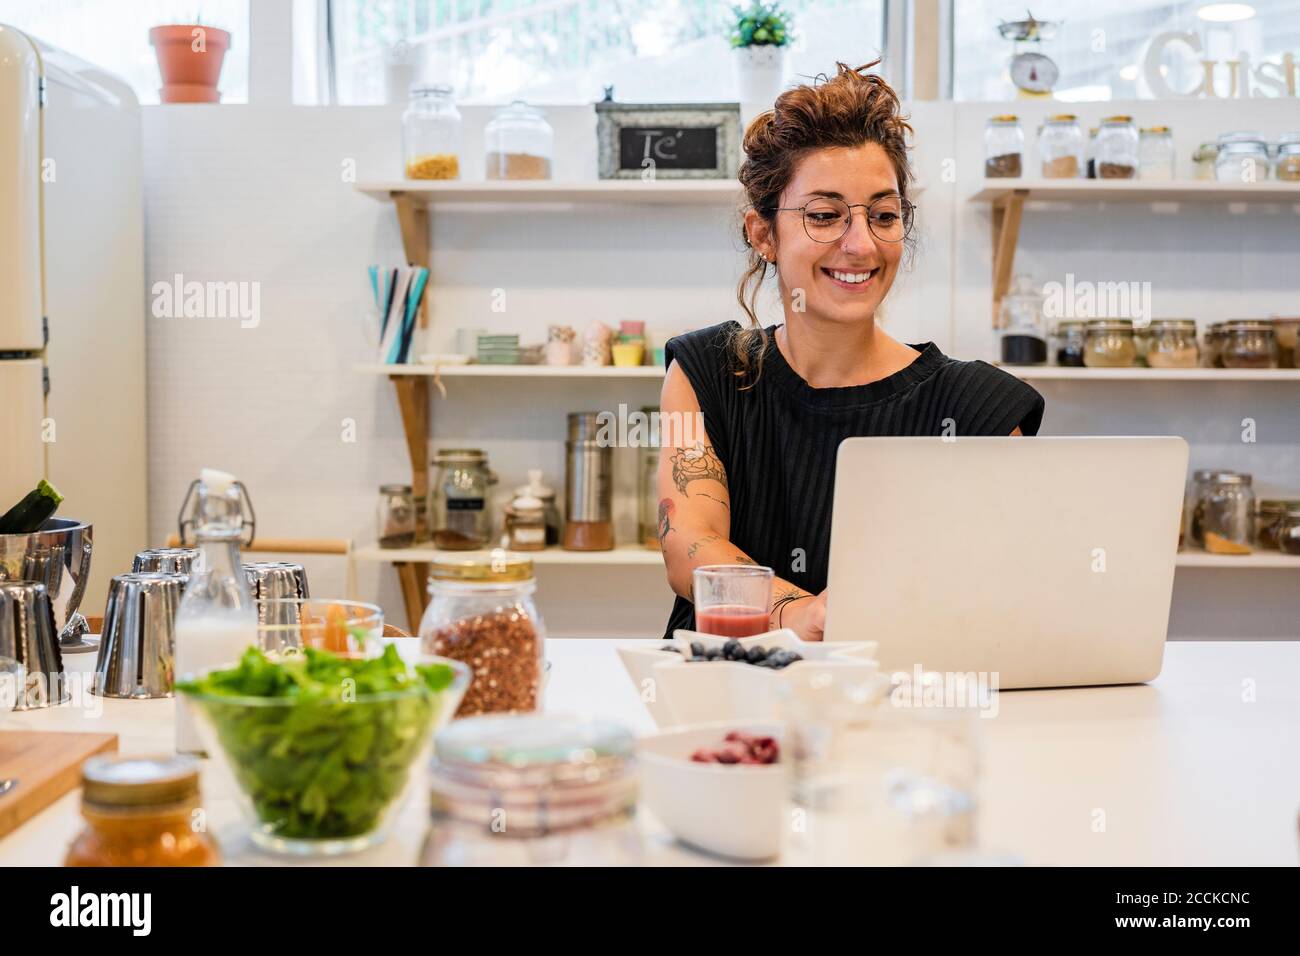 Smiling woman using laptop on kitchen island at cooking school Stock Photo